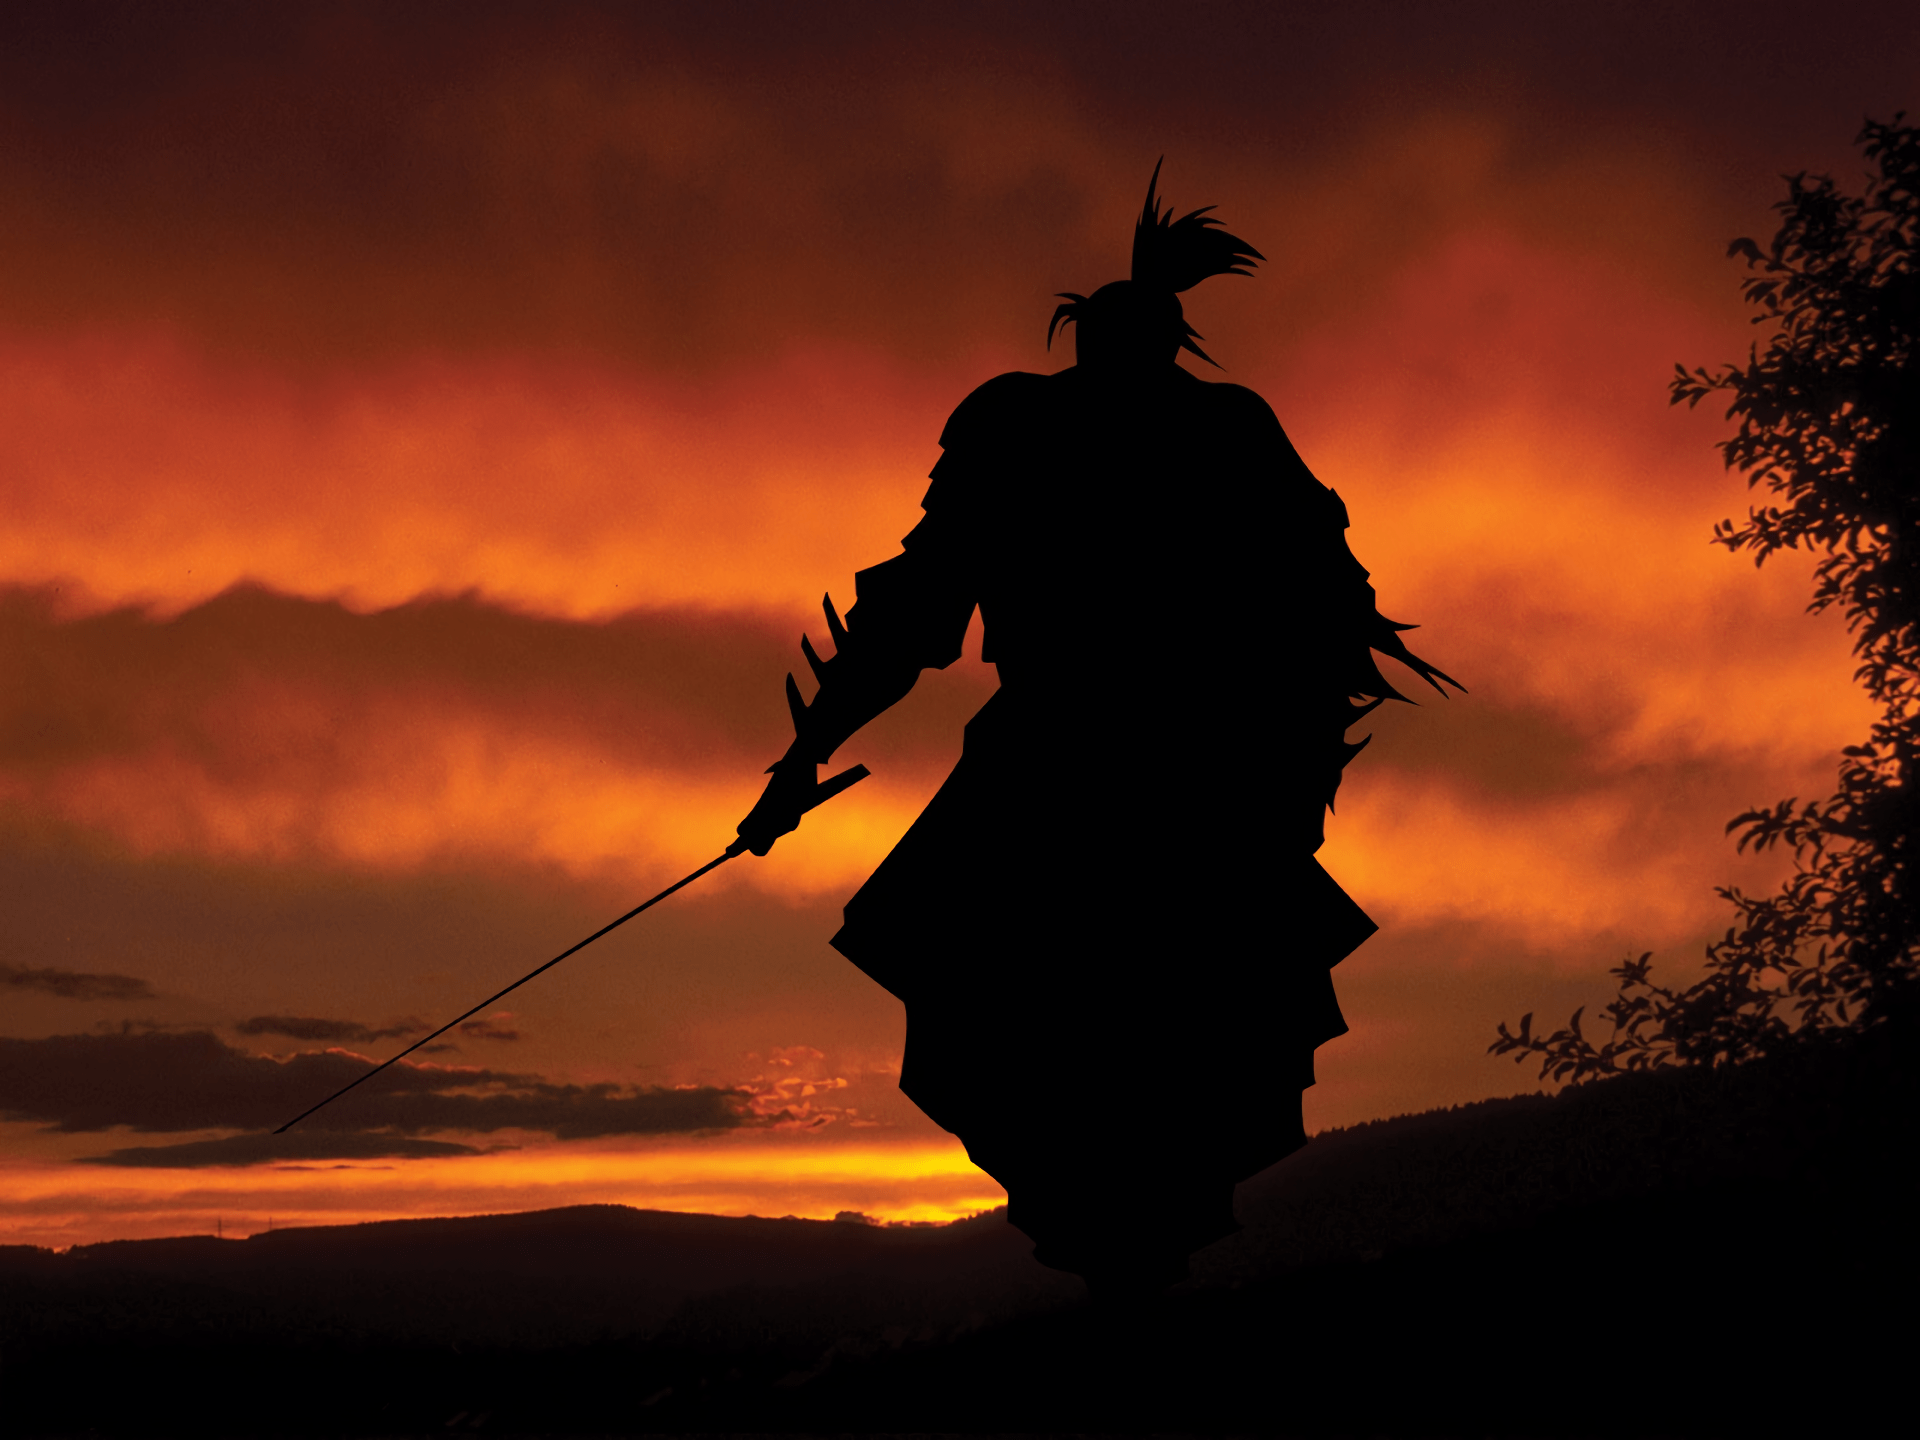 A man with sword standing on hill at sunset - Samurai